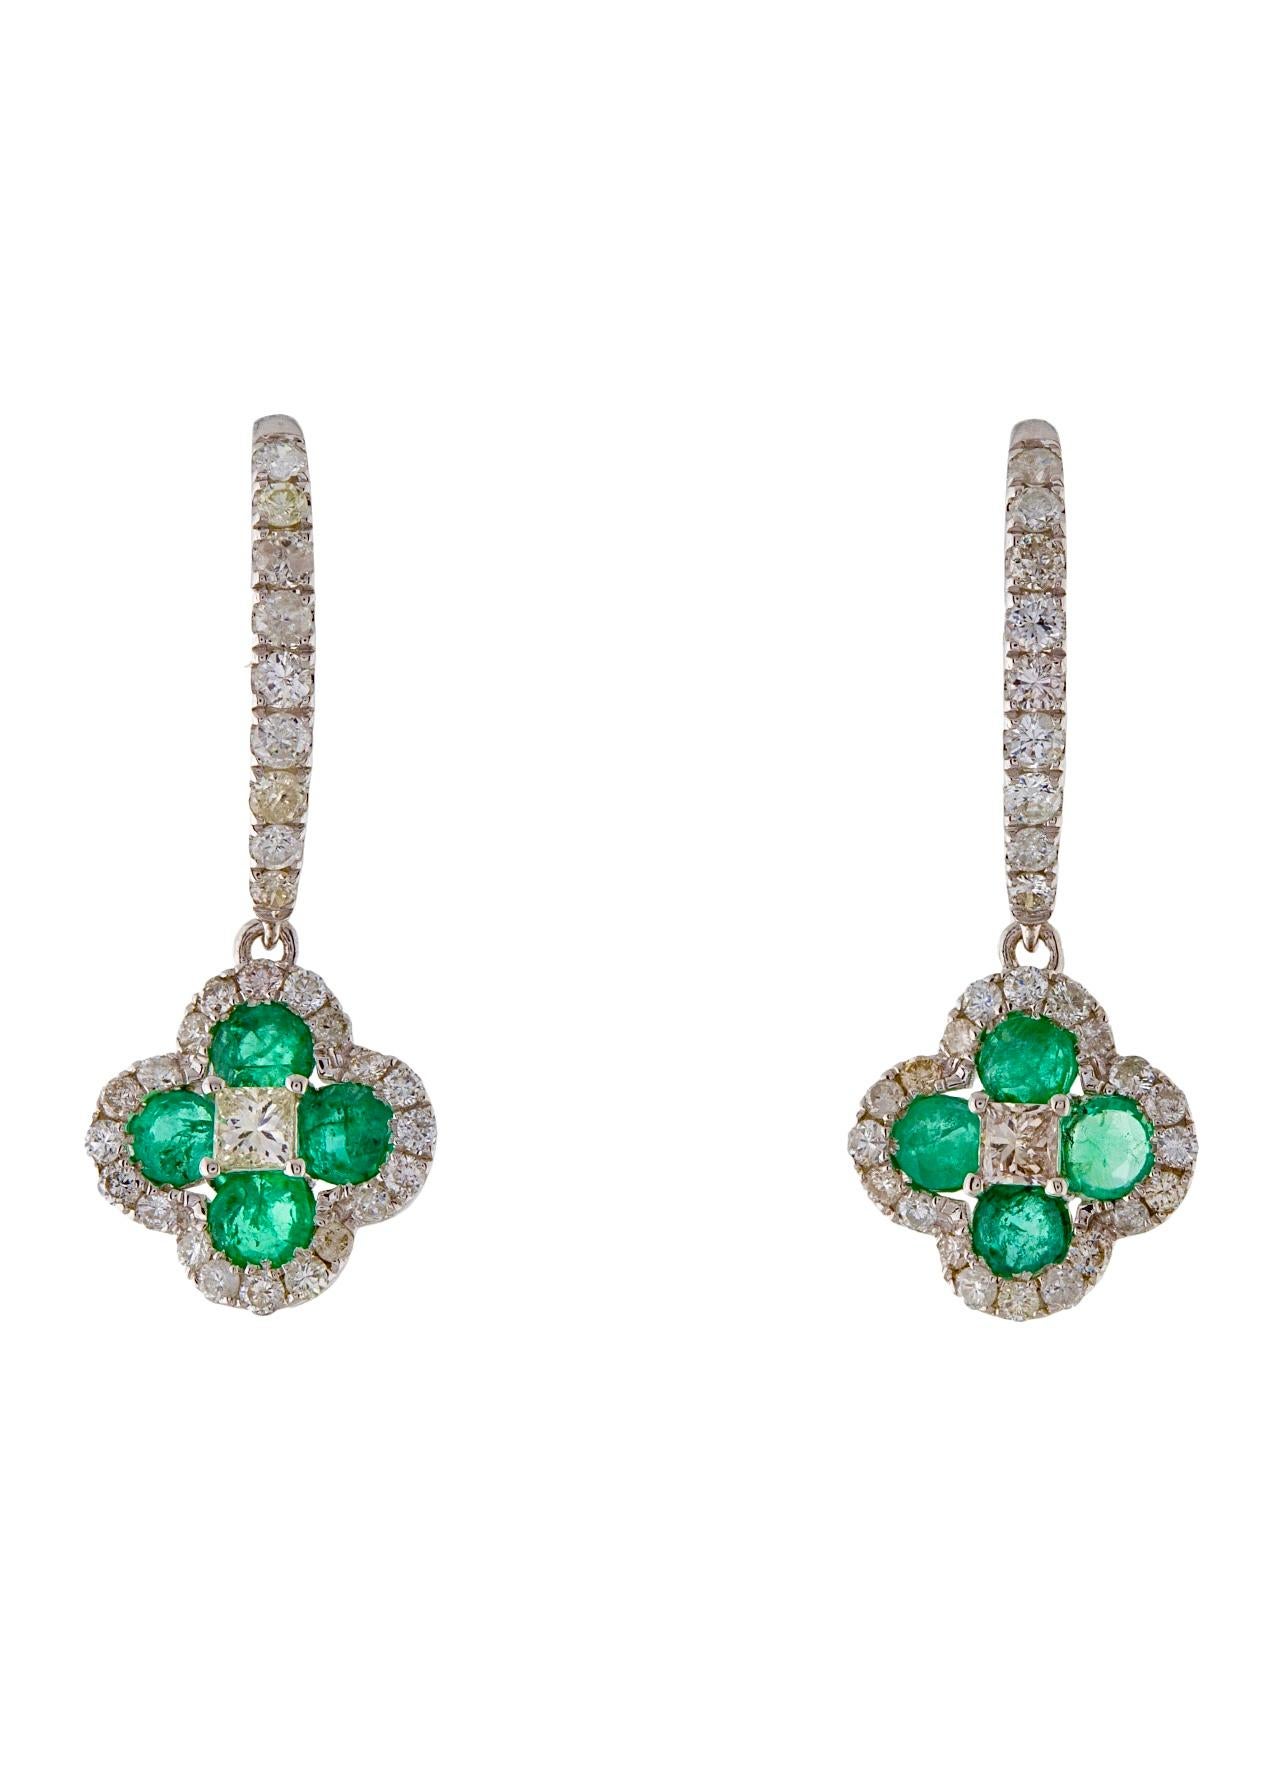 Enchanting 14k Green Emerald .90 crt Gems w/ .93 crt Diamond Drop Earrings In New Condition For Sale In kowloon, Kowloon